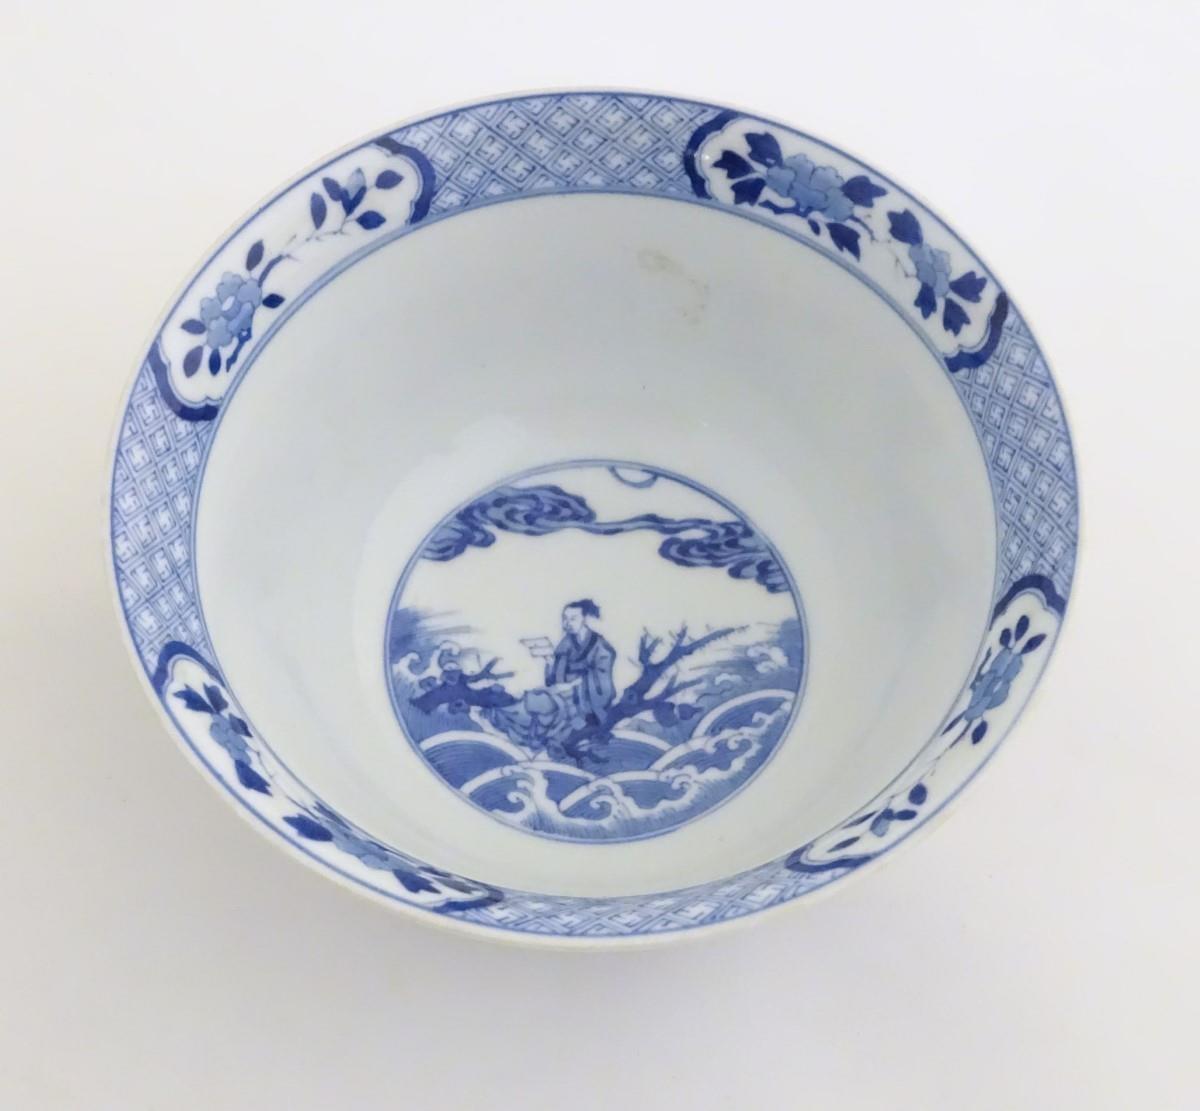 A Chinese blue and white footed bowl with a flared rim, decorated with a scene depicting the - Image 4 of 7